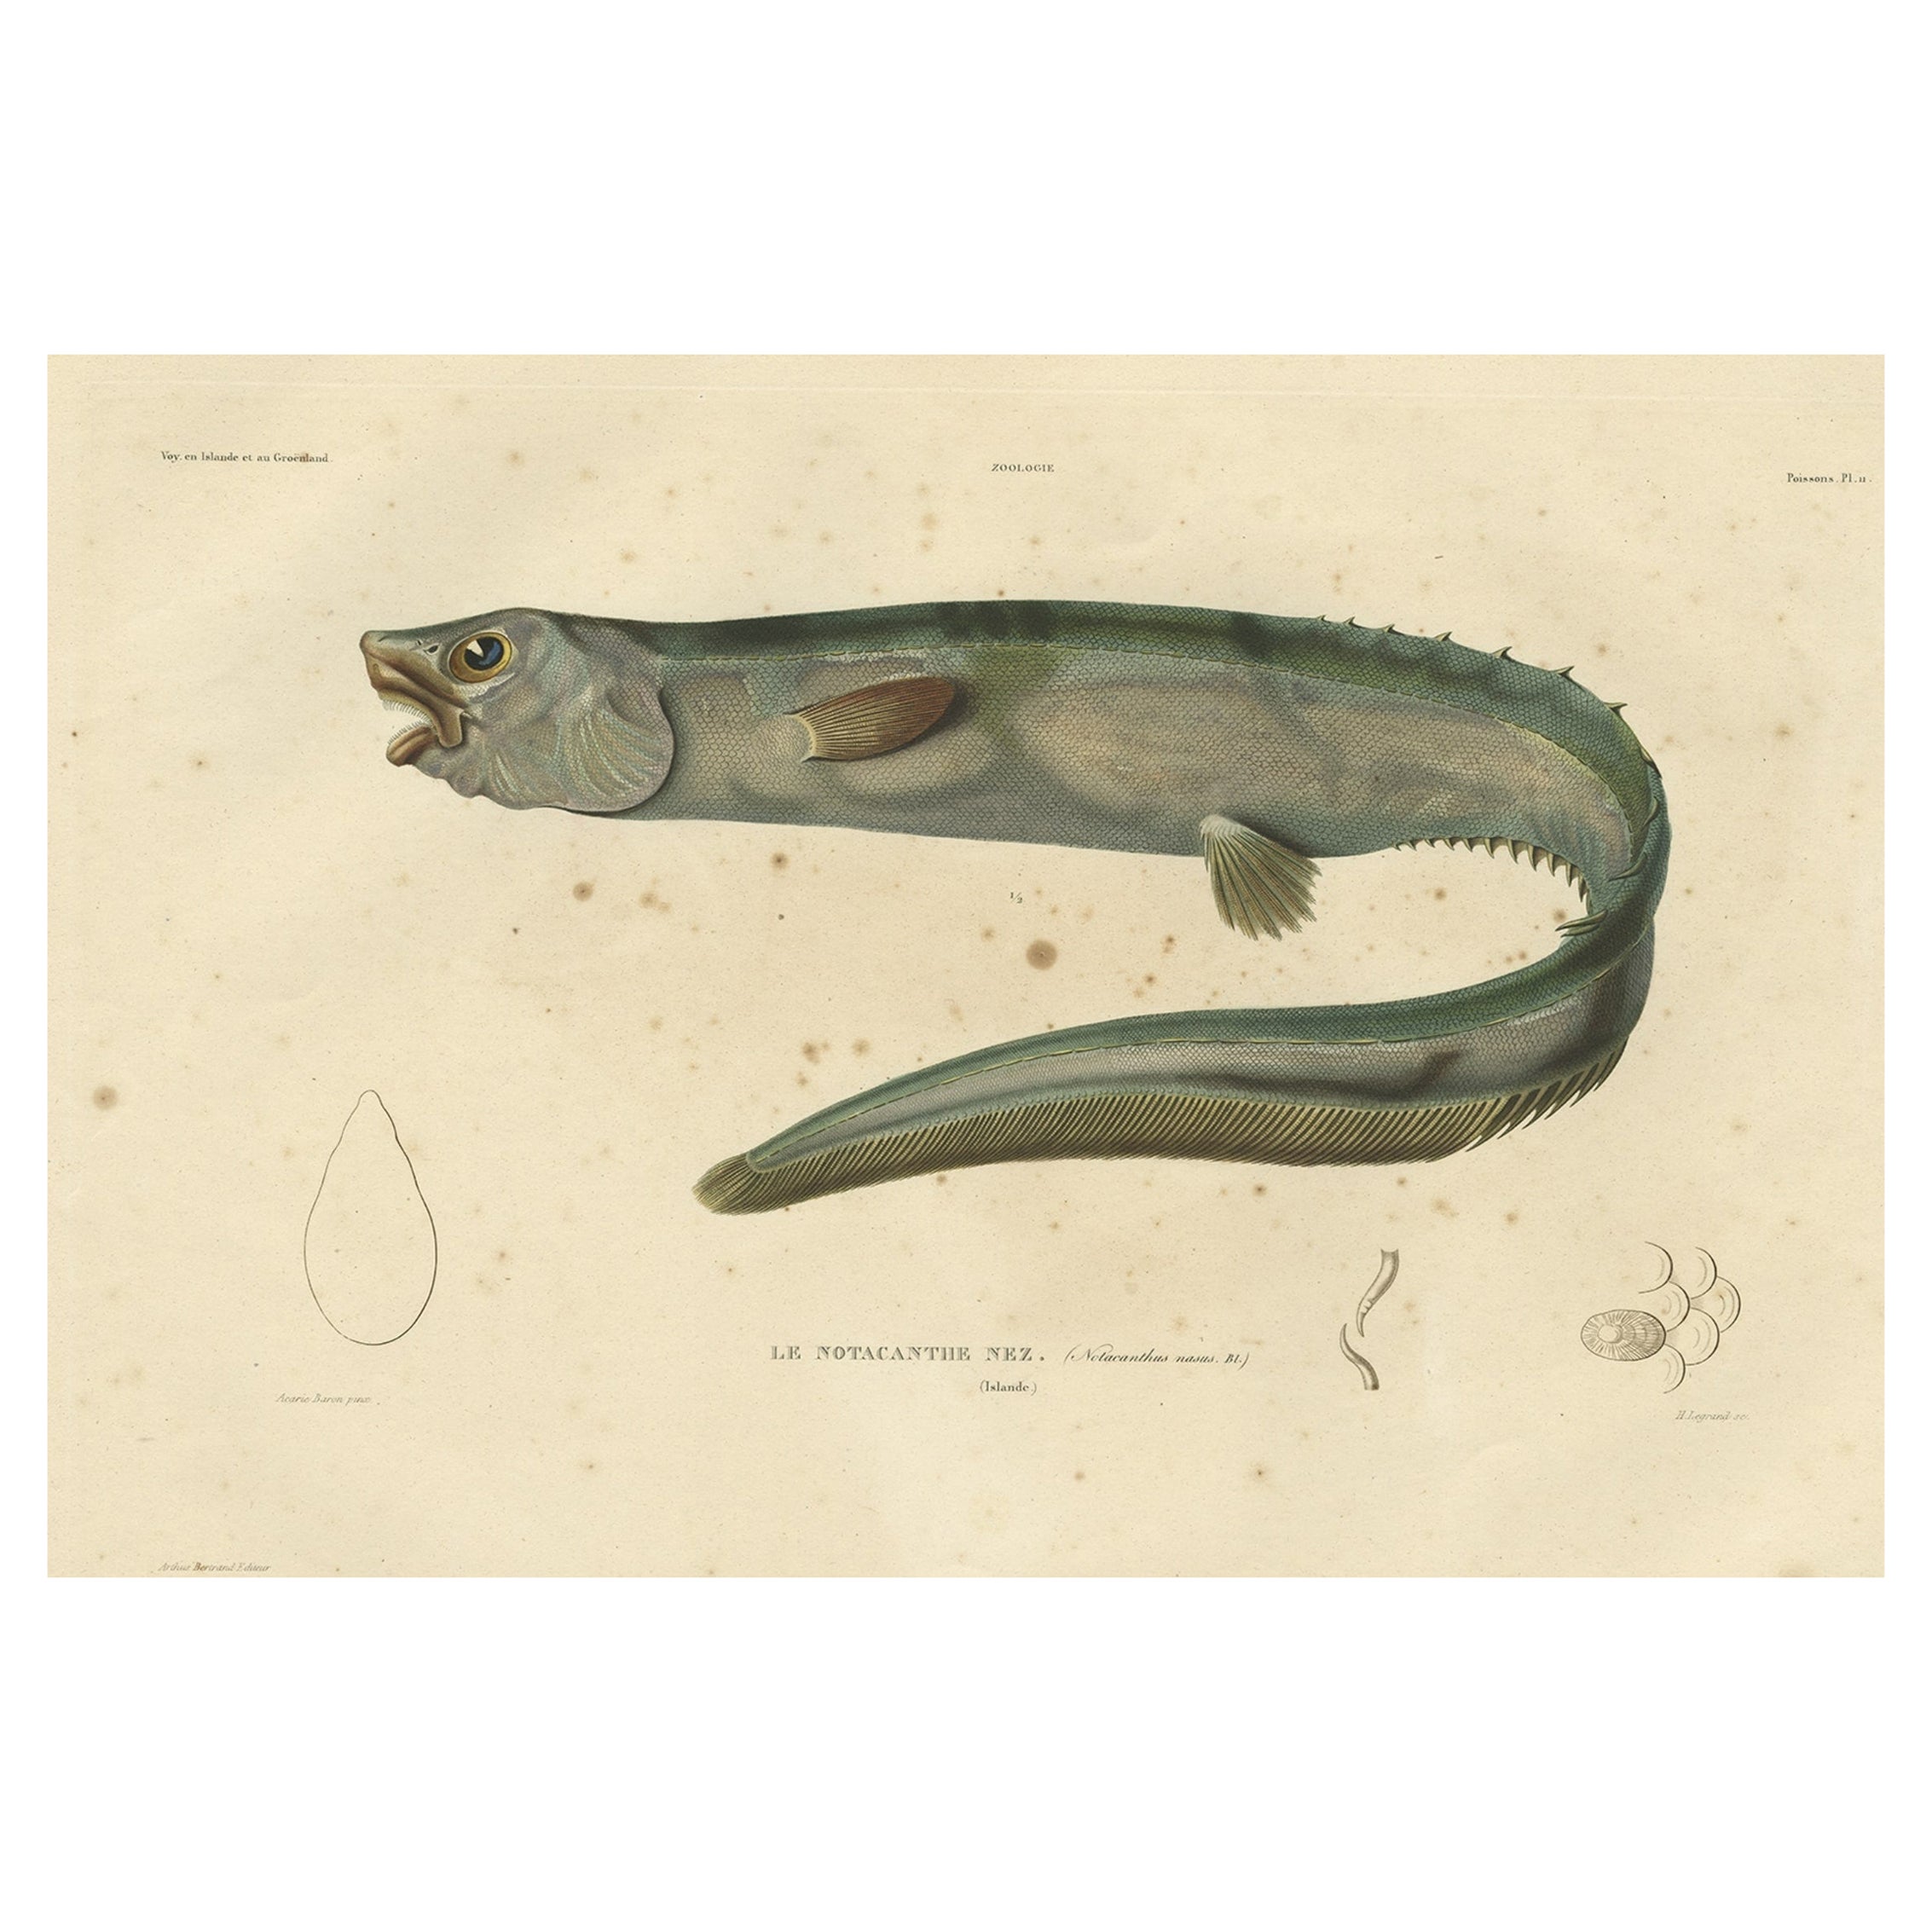 Antique Hand-Colored Fish Print of the Snub-Nosed Spiny Eel, 1842